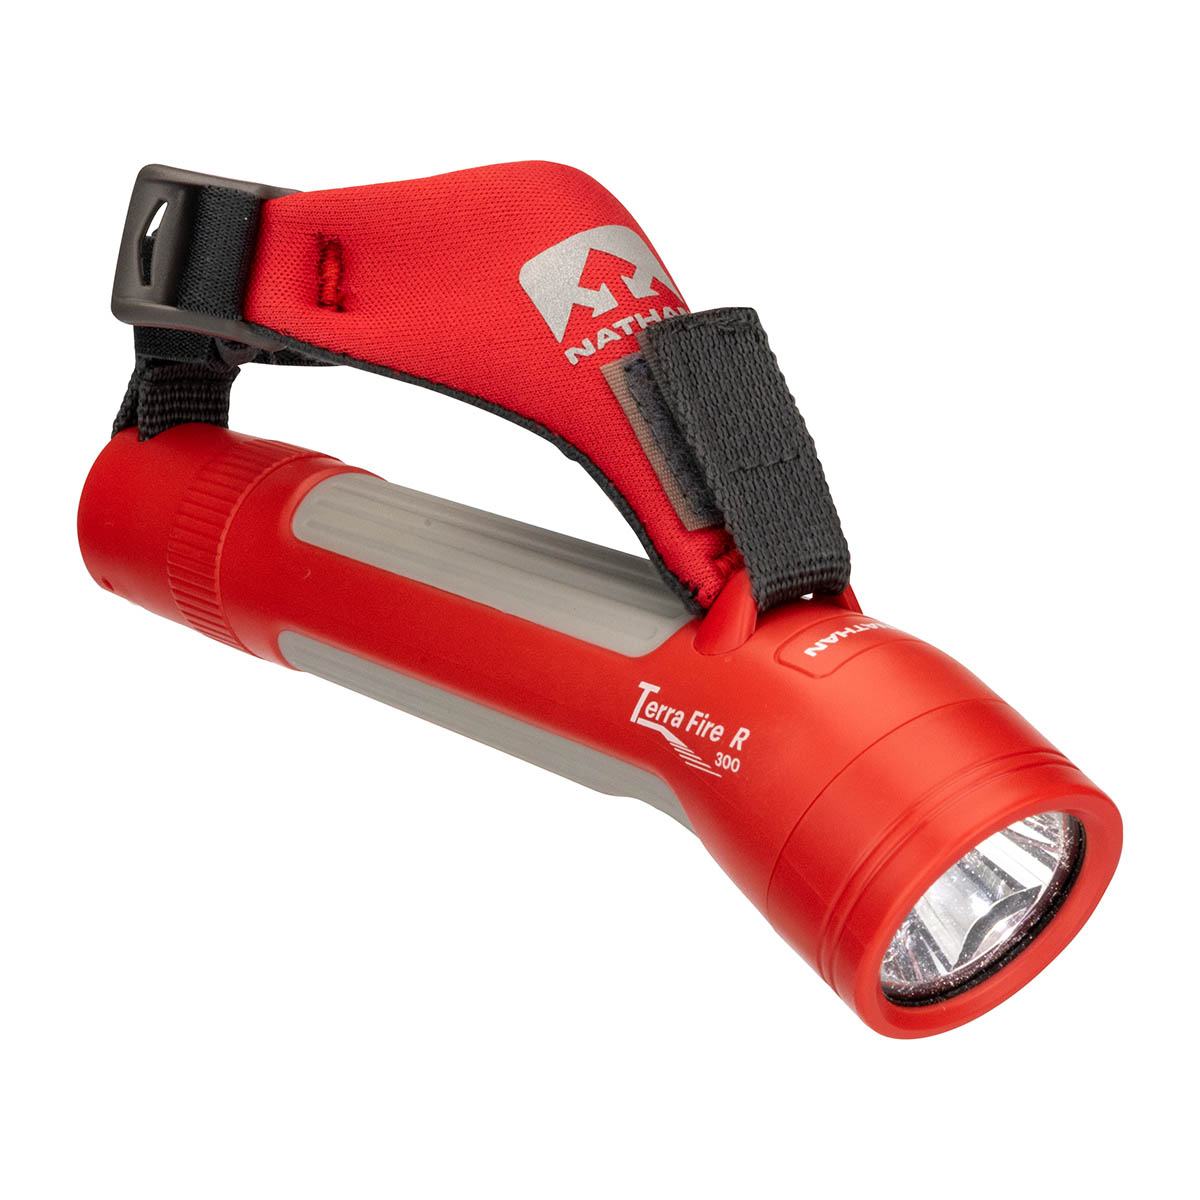 Nathan Terra Fire Hand Torch 300 R, , large image number null